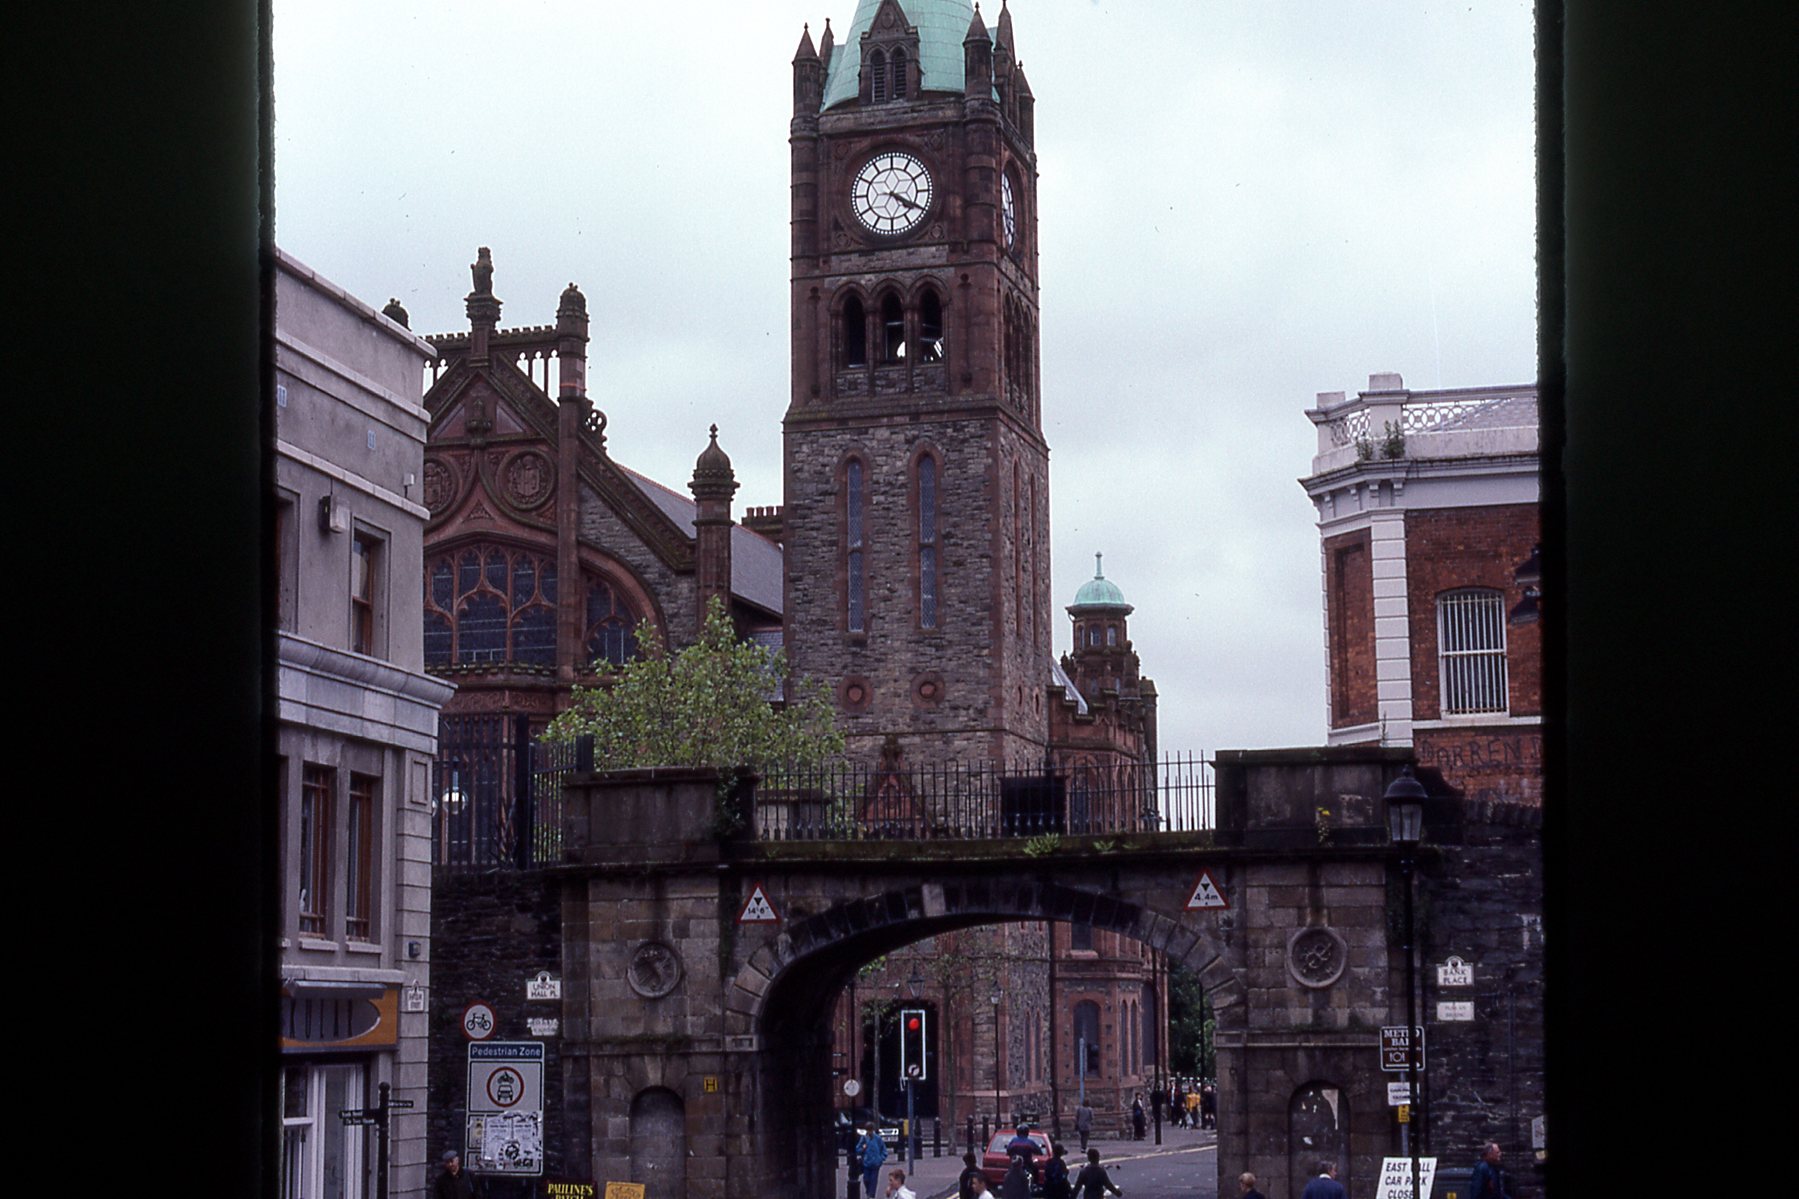 The Guildhall in Derry City (Londonderry)